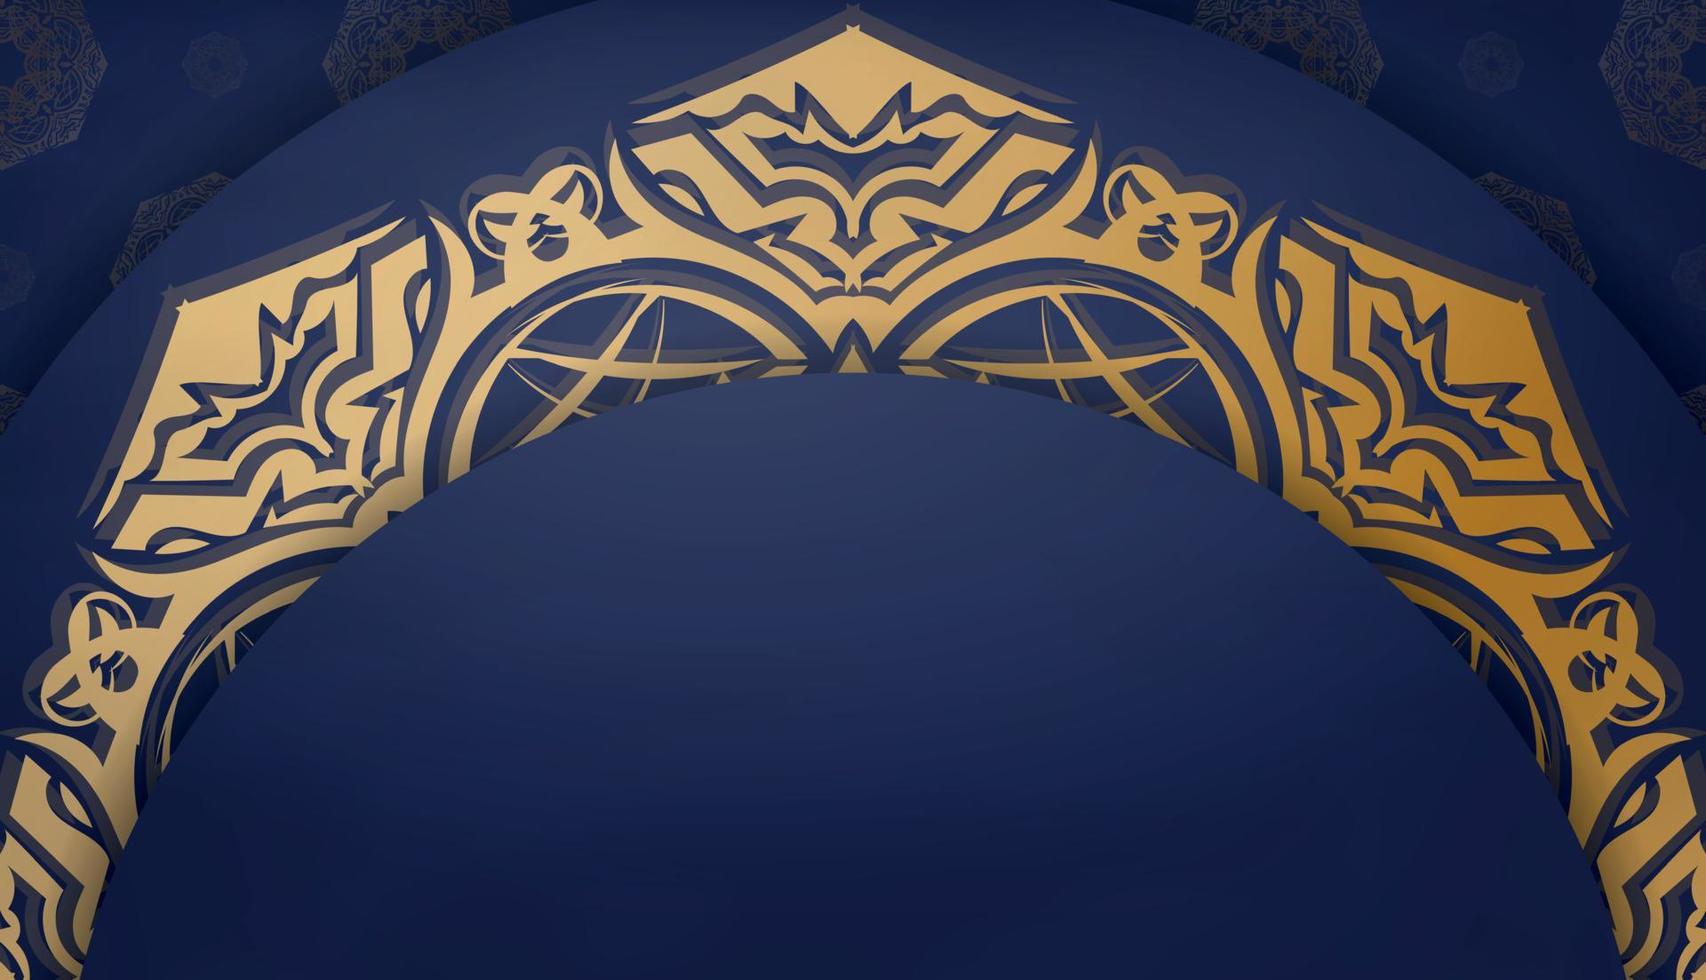 Dark blue banner with luxurious gold ornaments for design under your logo or text vector